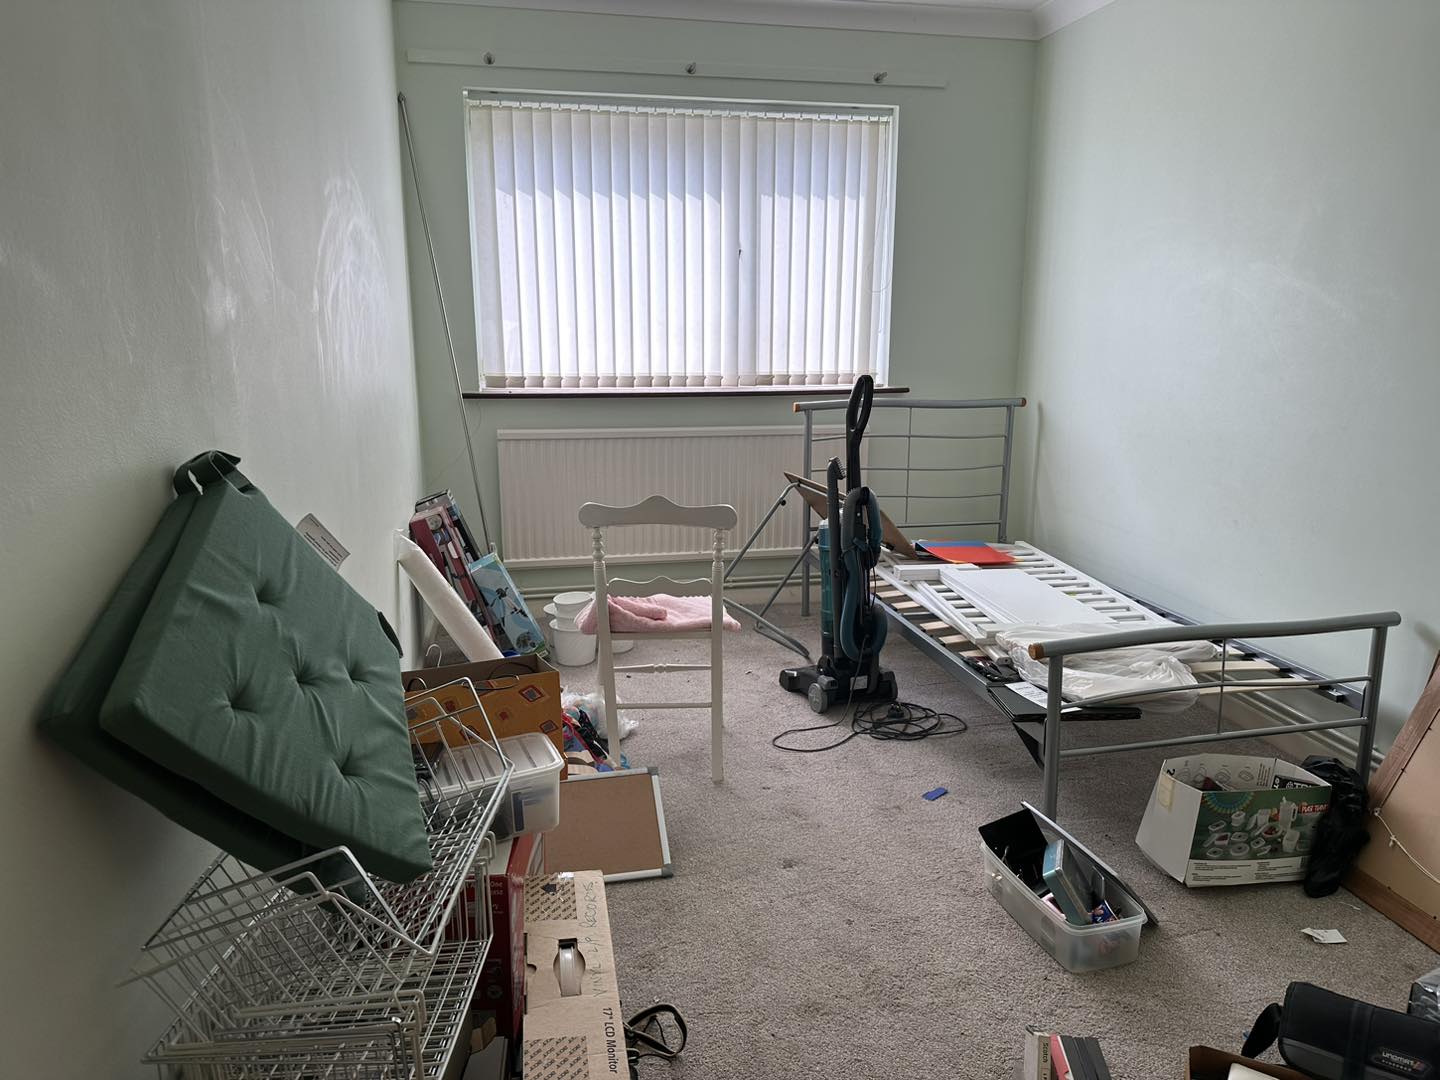 A photo of a house bedroom that is full of waste